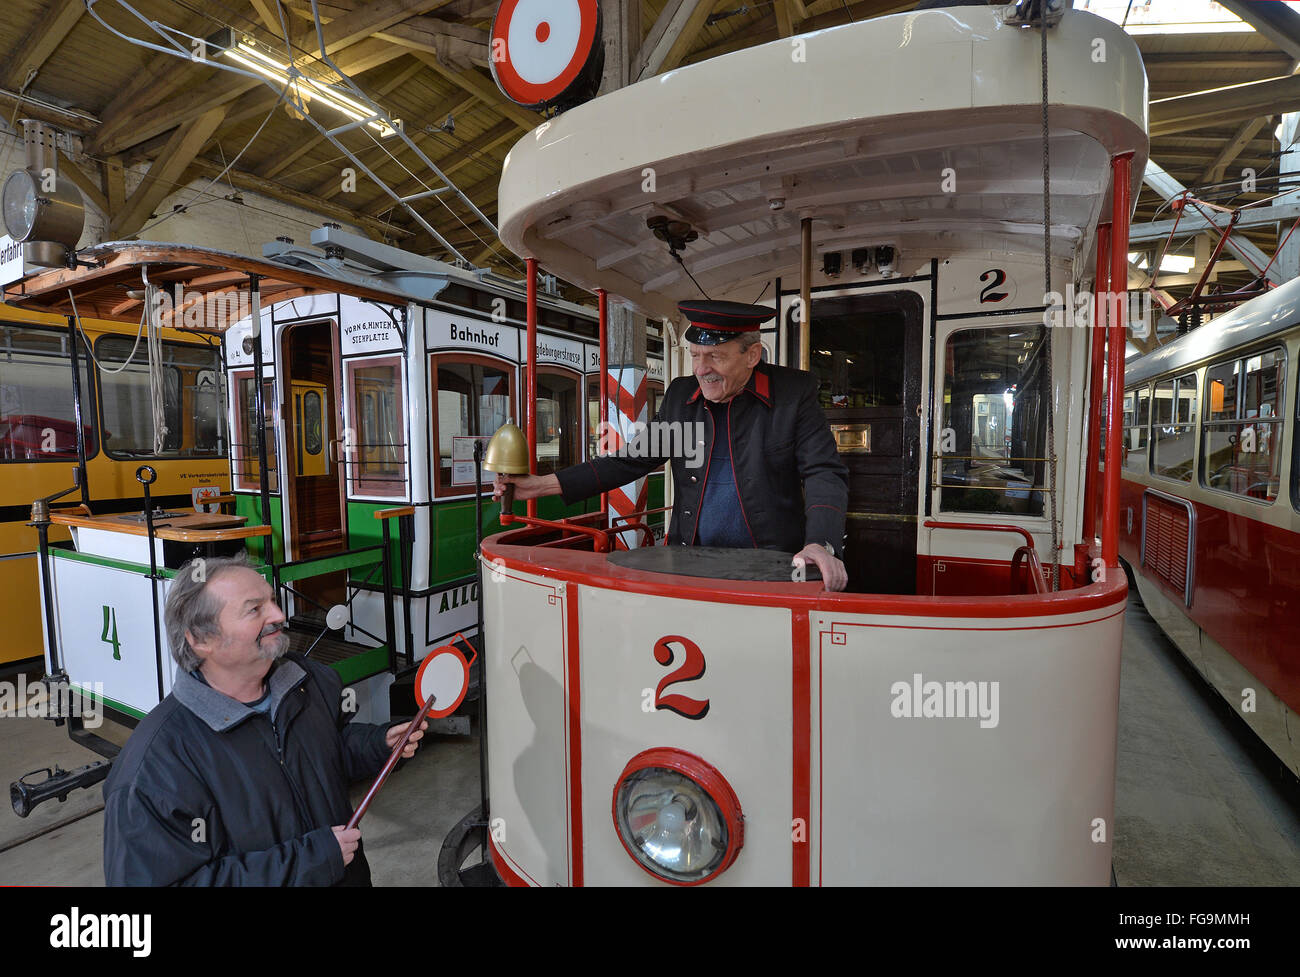 Harald Mey and Manfred Schumann standing in a historical railcar of the MAN machine works Augsburg from 1911 in the tram museum in Halle, Germany, 18 February 2016. Halle is known as a pioneering city in the tram history with the first electrical tram network in Europe, having been erected in 1891. In the central station, the exhibition '125 Jahre elektrisiert durch Halle (Saale)' (lit. '125 years electrified through Halle') is opening tonight. PHOTO: HENDRICK SCHMIDT/dpa Stock Photo